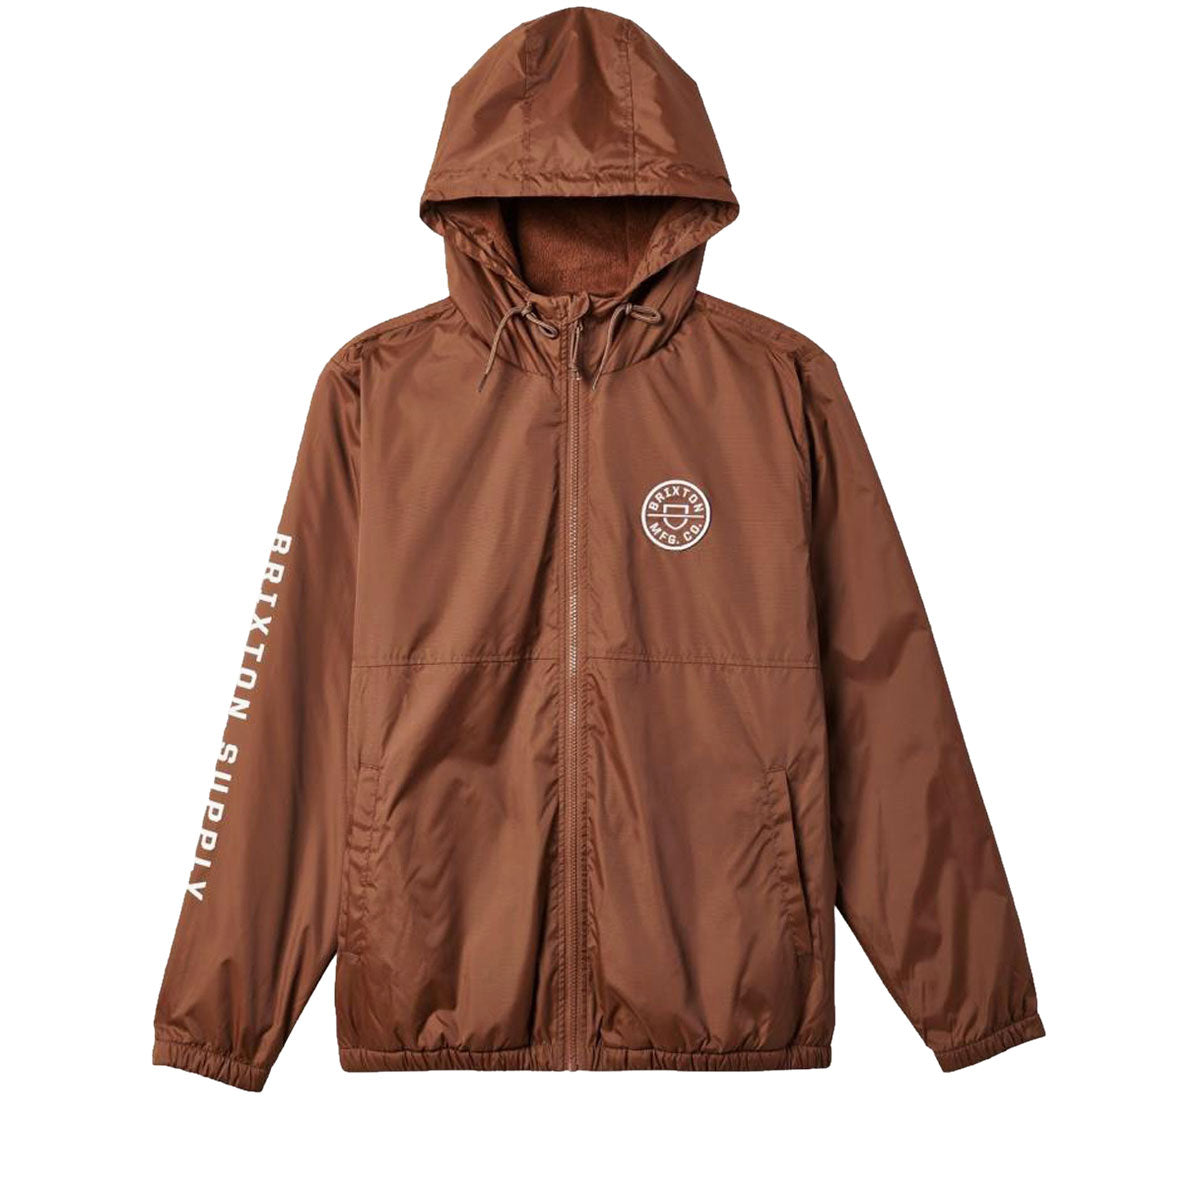 Brixton Claxton Crest Lined Hooded Jacket - Bison image 1